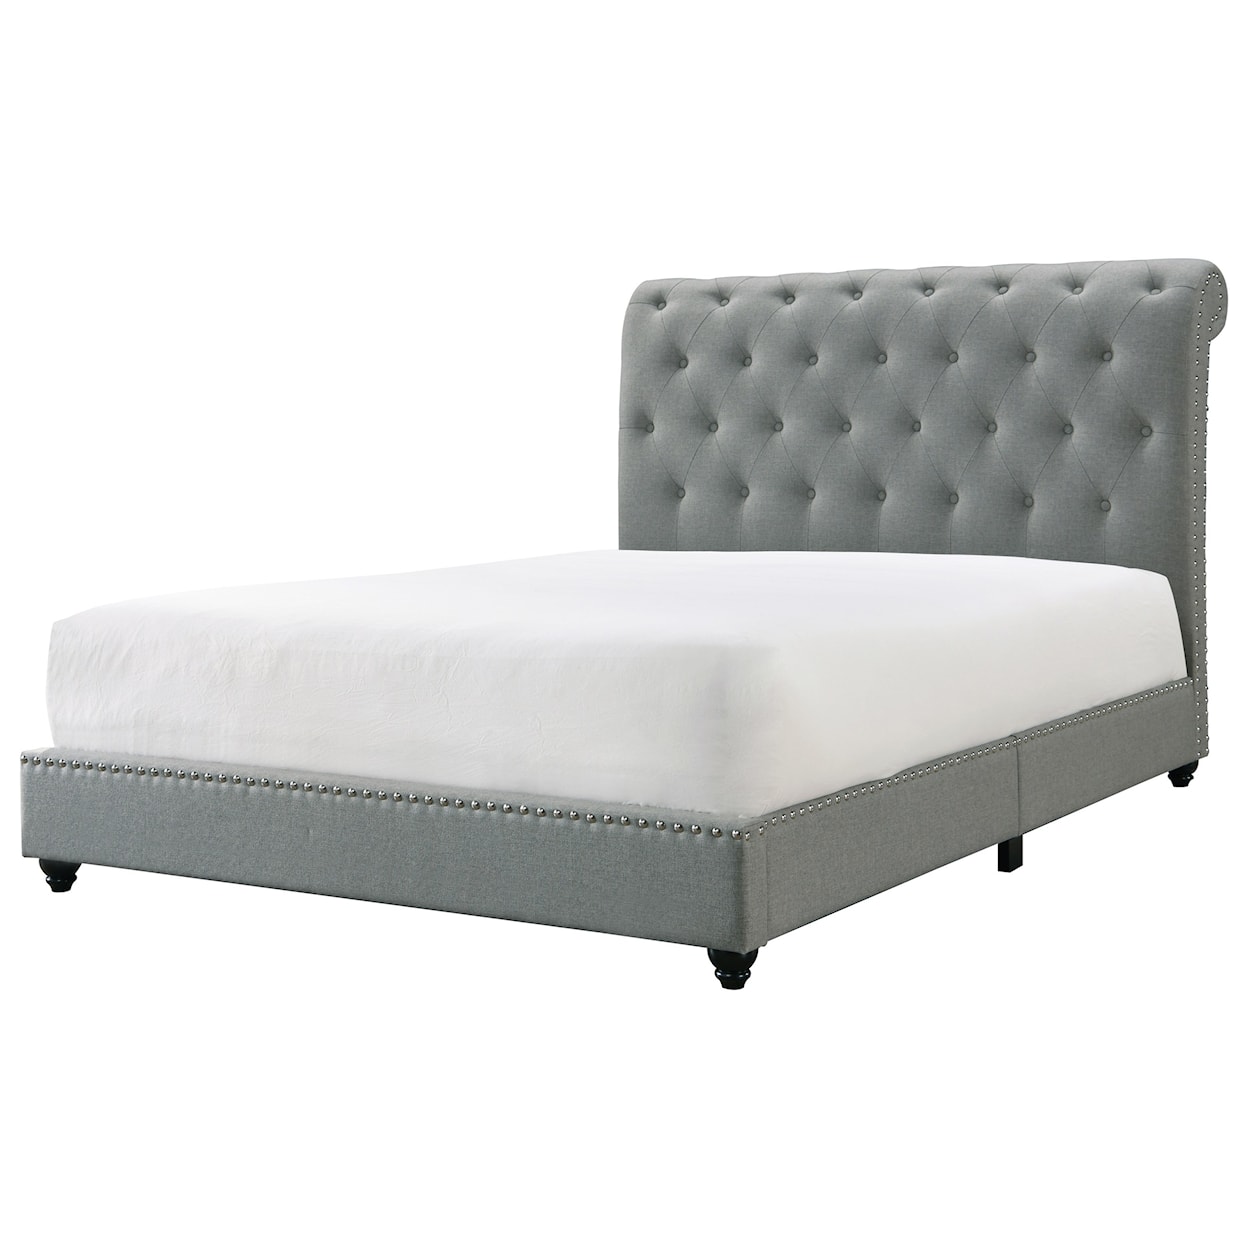 CM Janine Queen Platform Bed with USB Ports